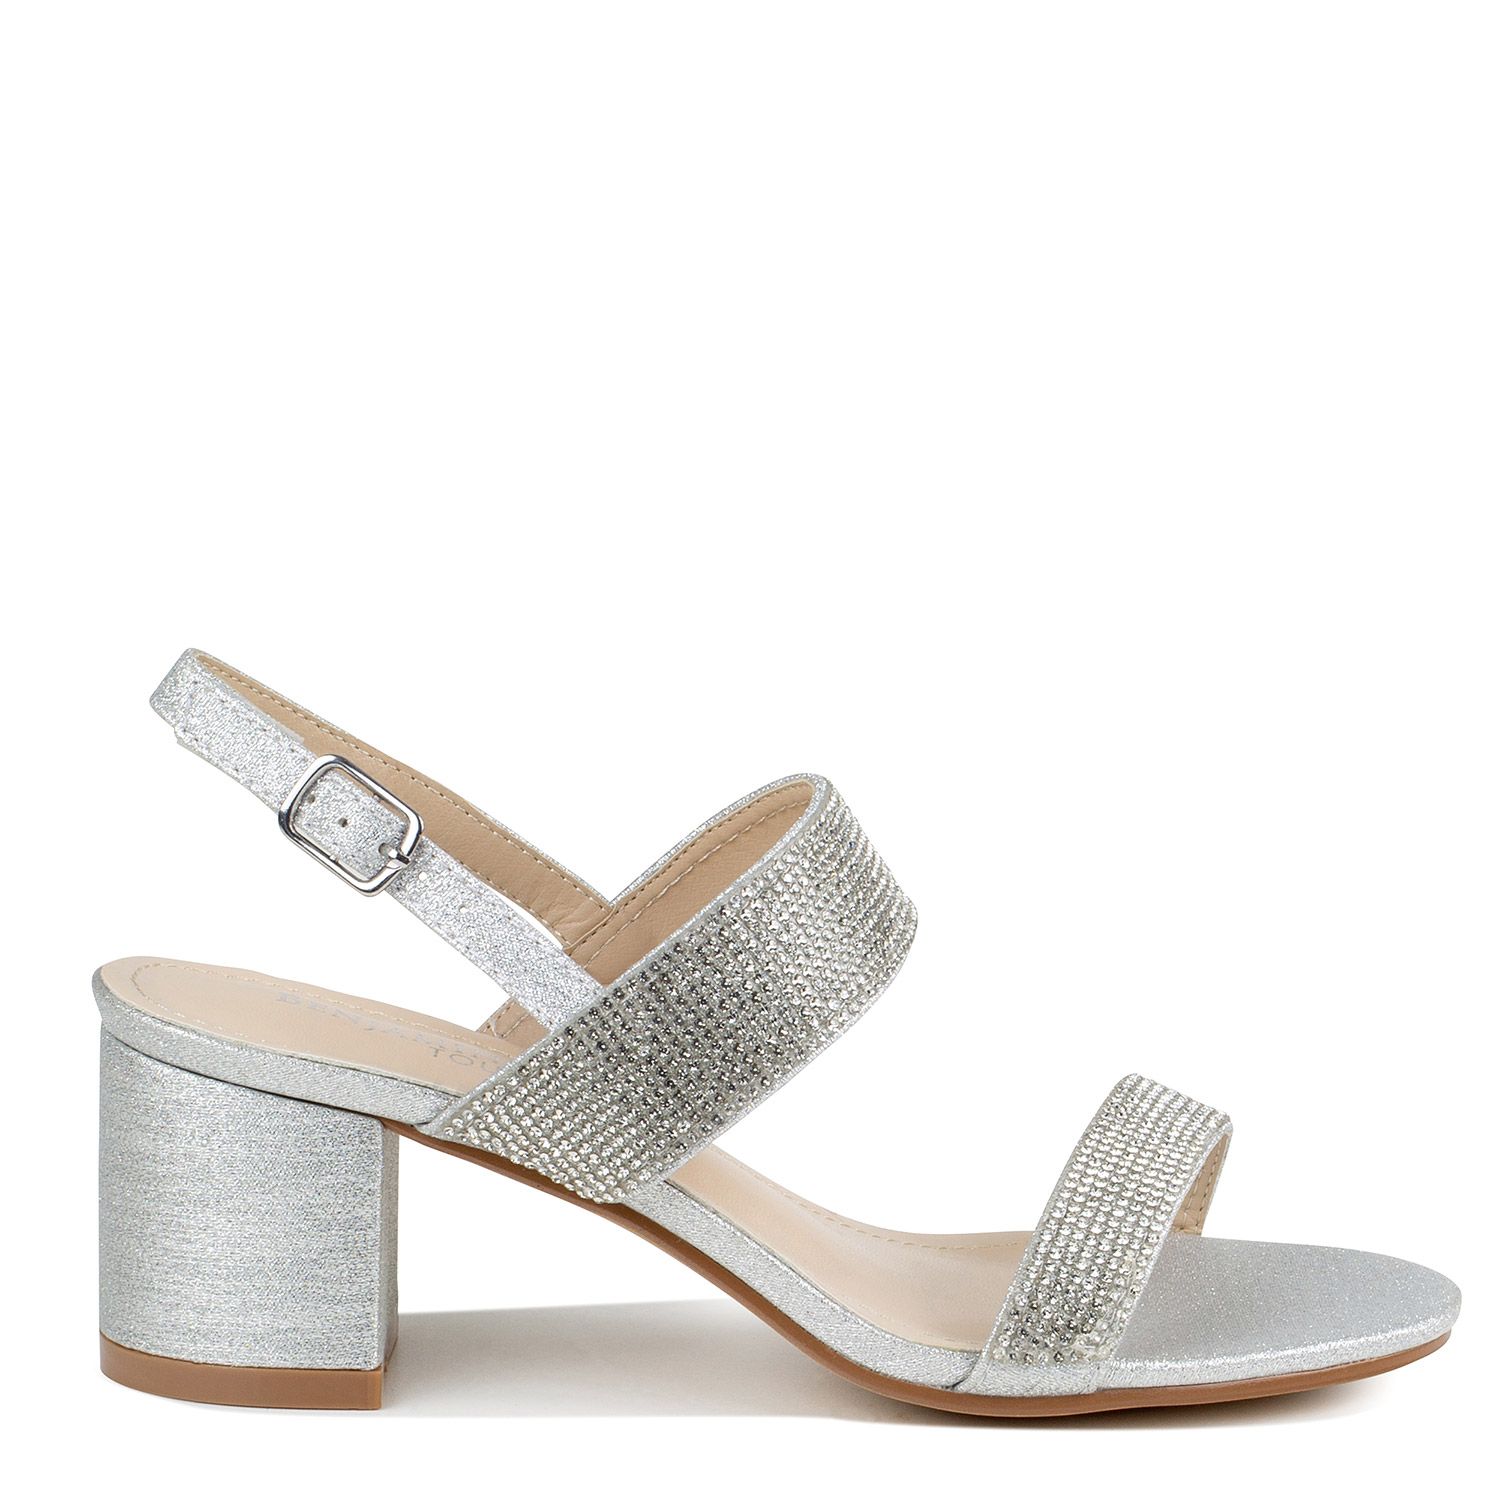 SIDE VIEW OF SILVER GLITTER SHOE WITH WIDE BANDS AND 2 INCH BLOCK HEEL